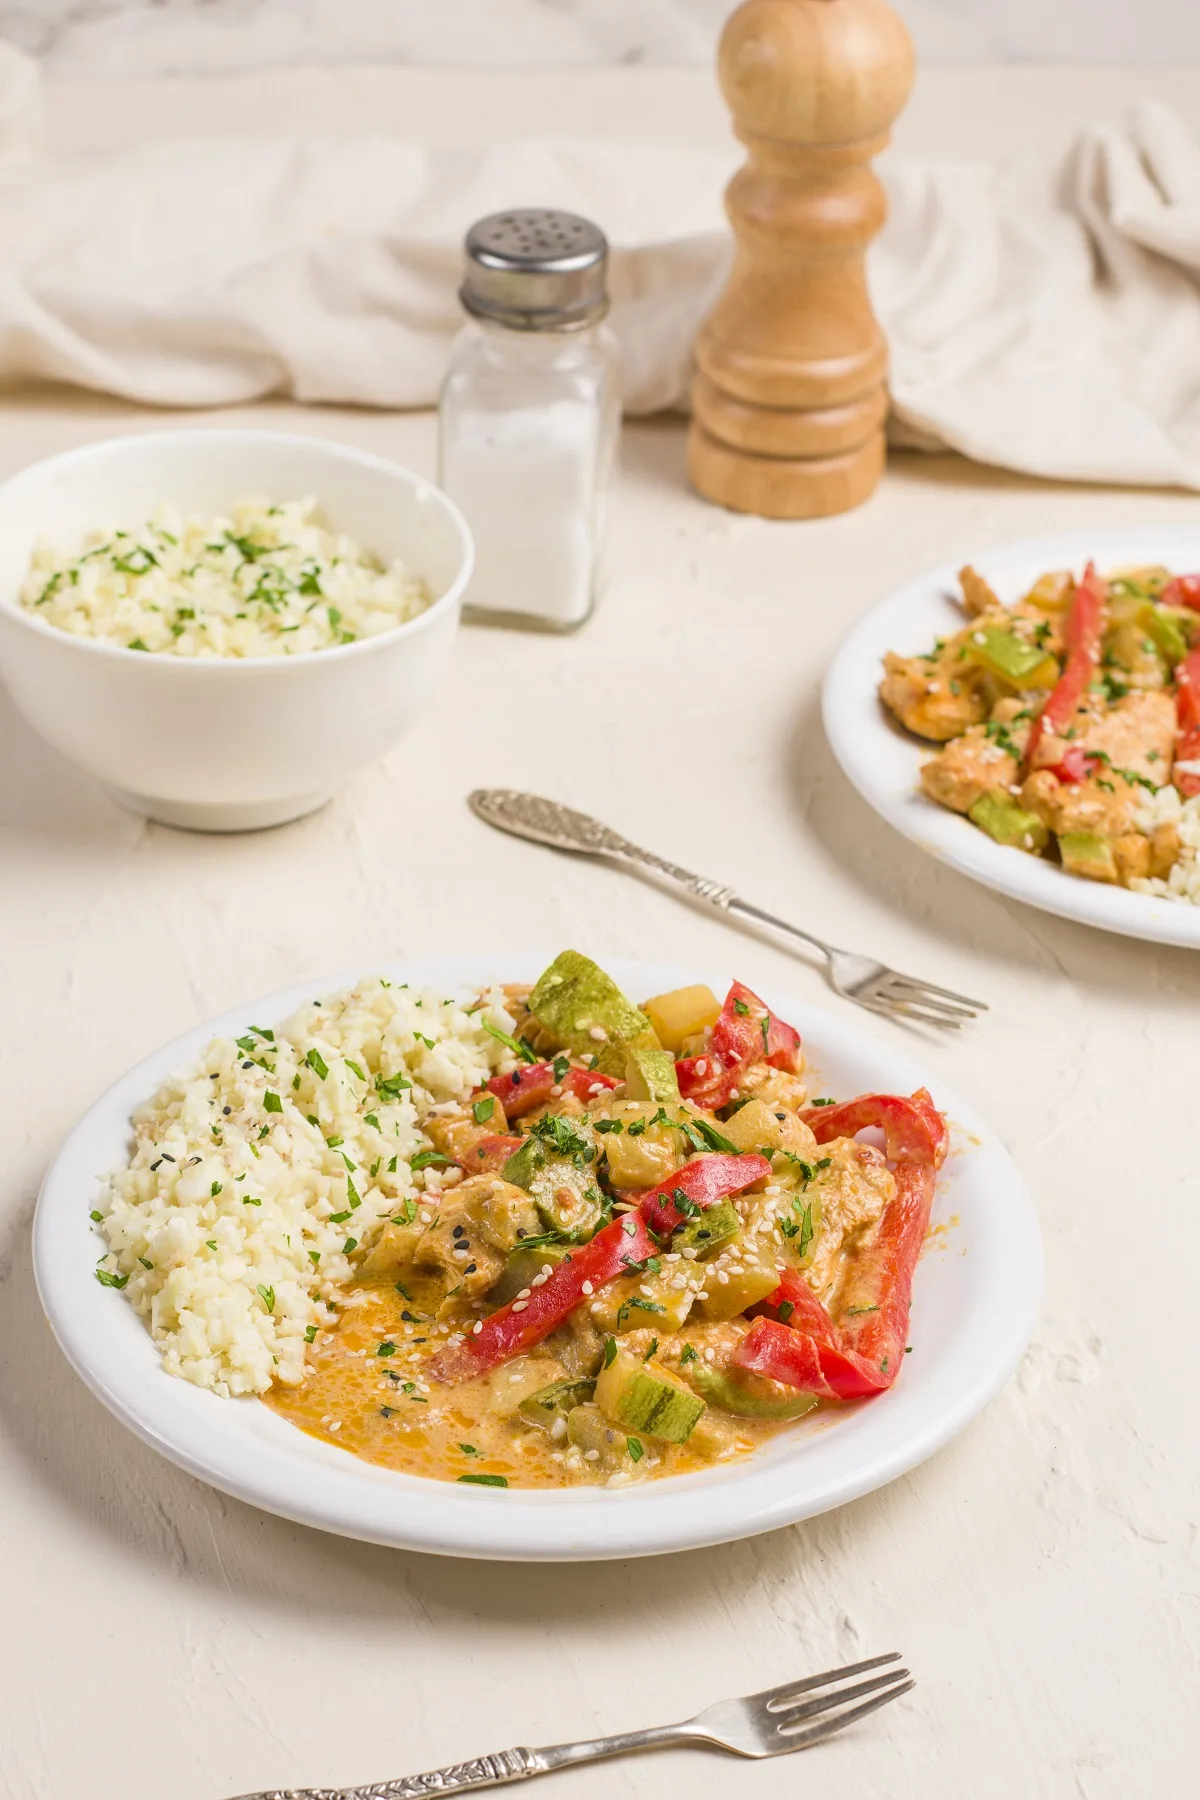 Easy Red Curry Chicken with Vegetables - this healthy red curry recipe only requires about 45 minutes, and is paleo and whole30 approved